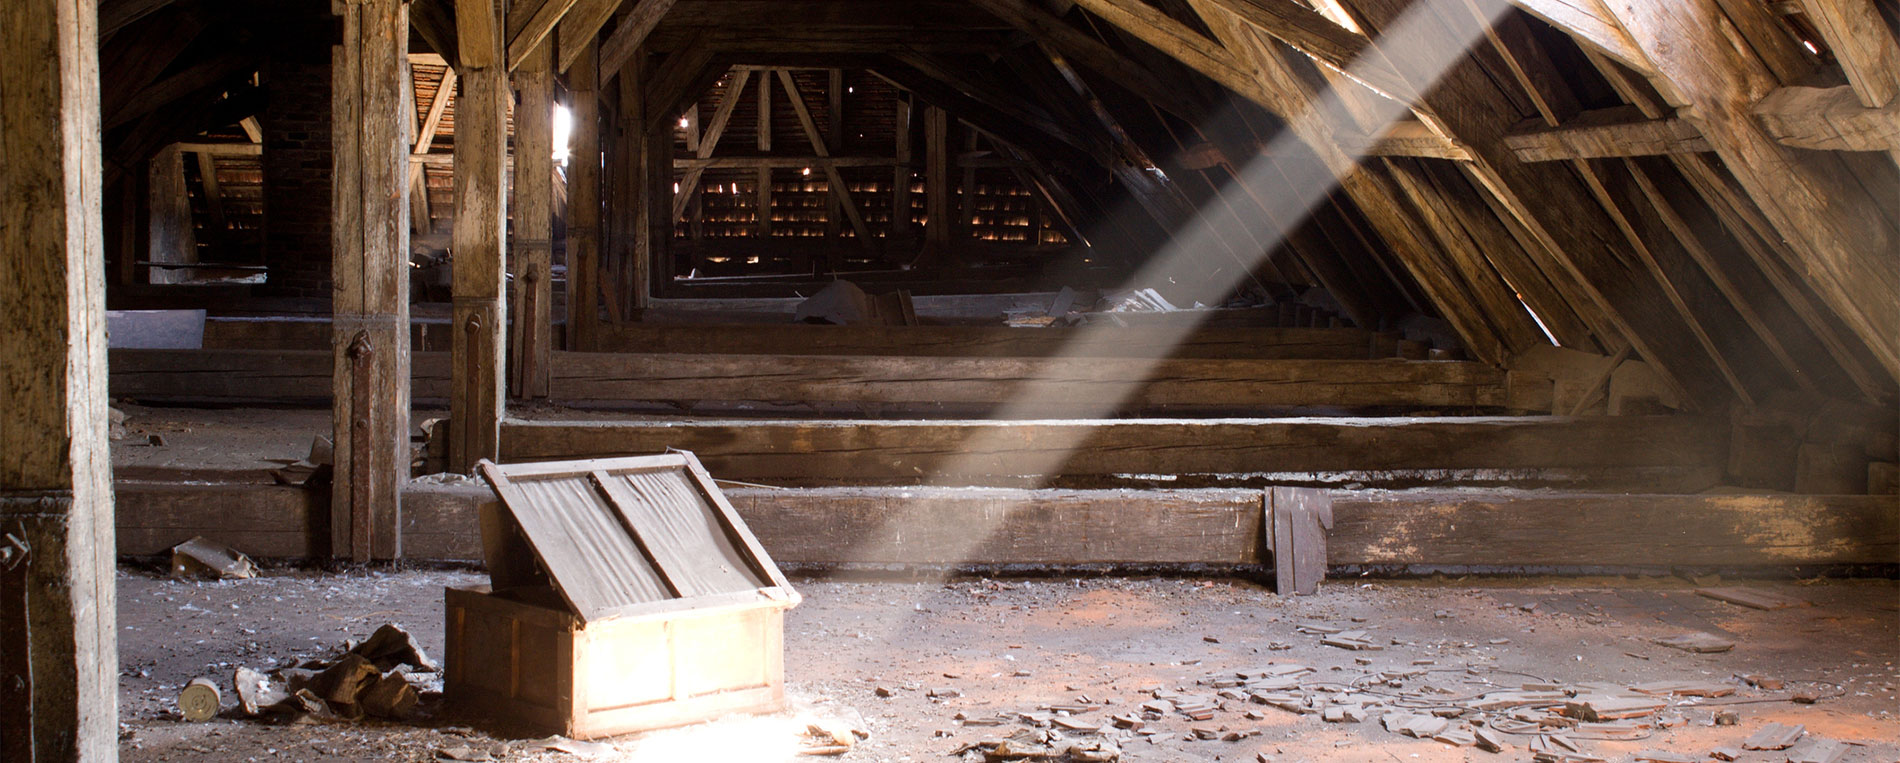 Crawl Space Cleaning – Out of Sight, Out of Mind? Think Again!